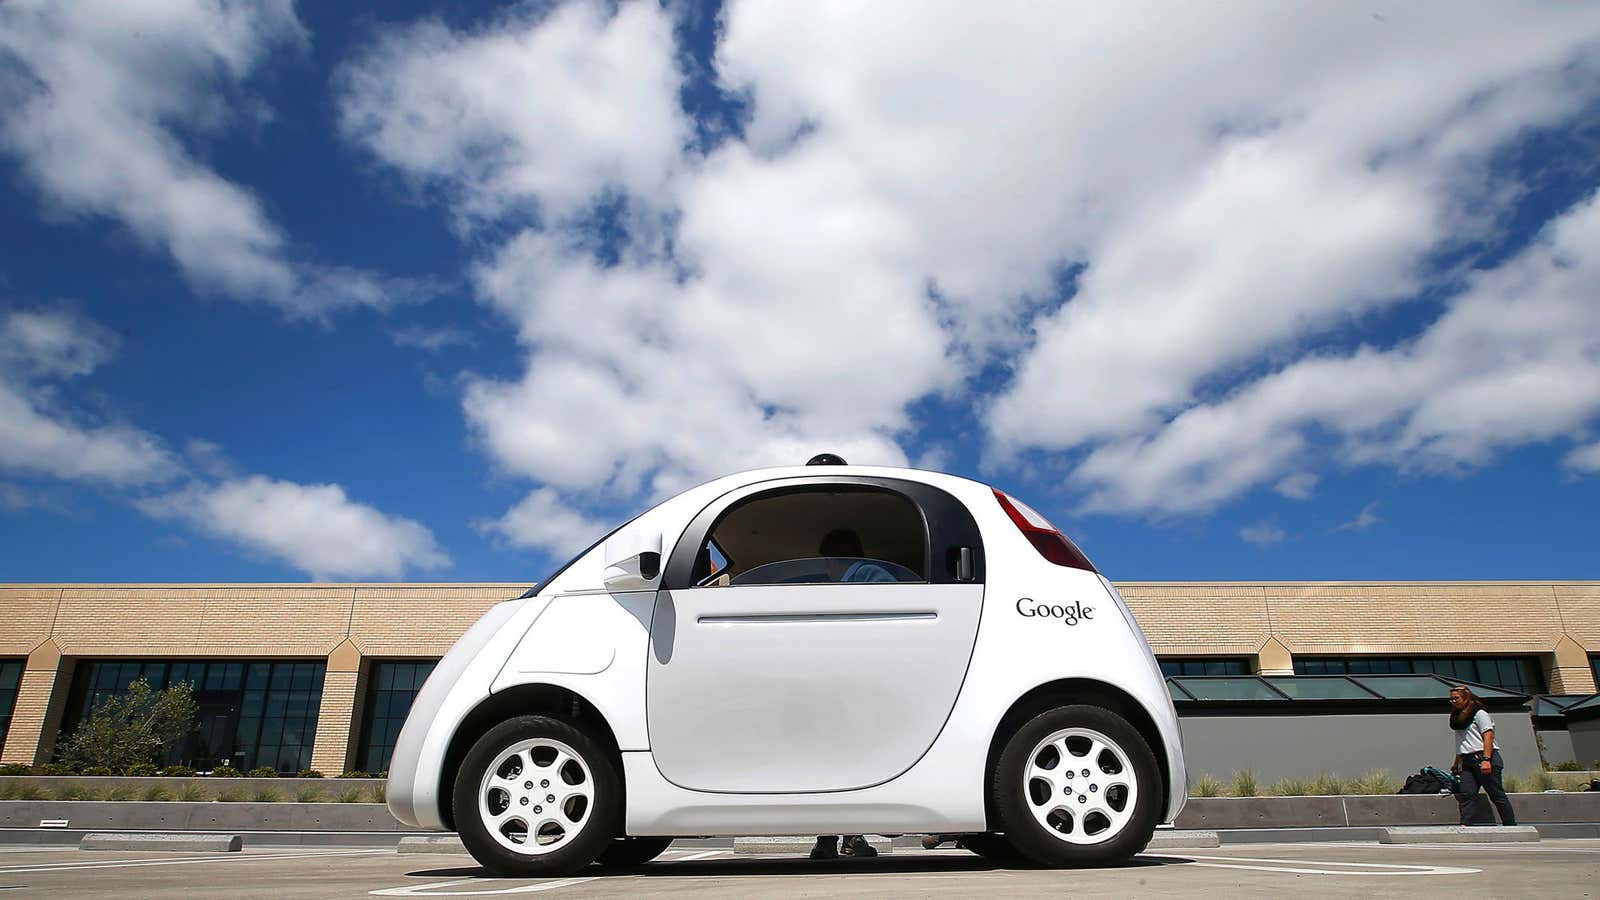 Self-driving cars are a myriad ethical quandaries on wheels.